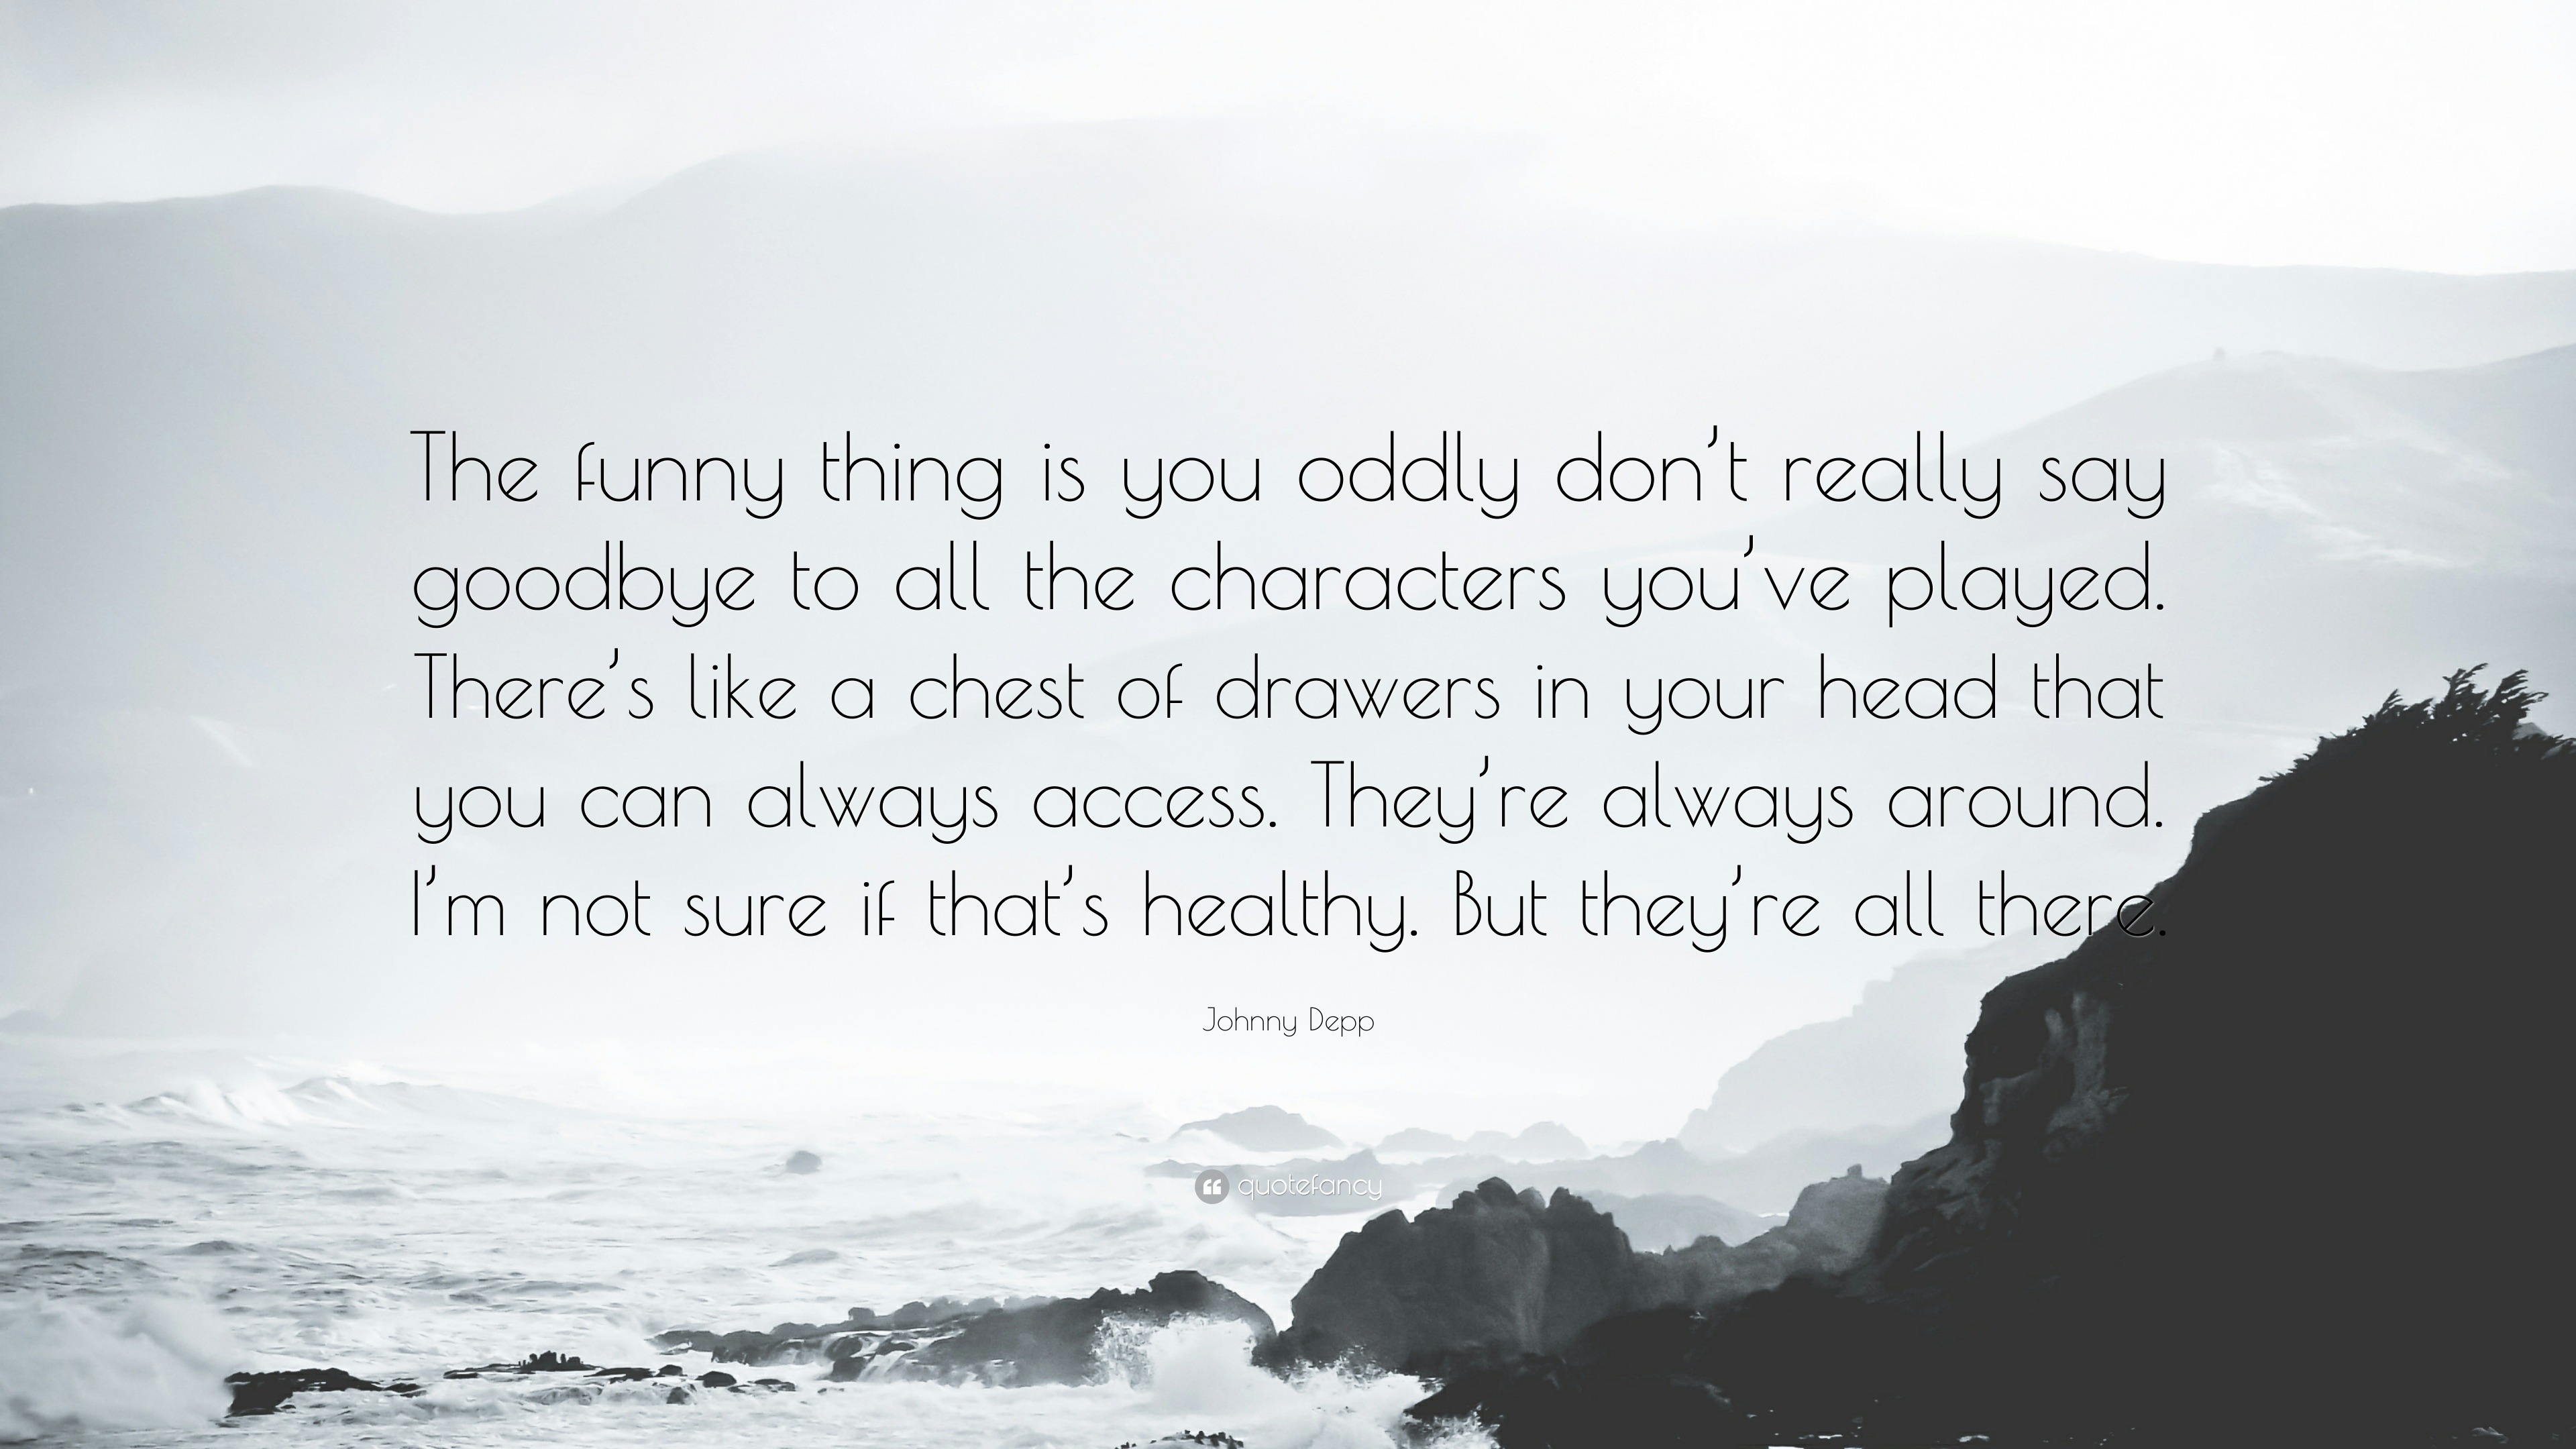 Goodbye Quotes (40 wallpapers) - Quotefancy3840 x 2160